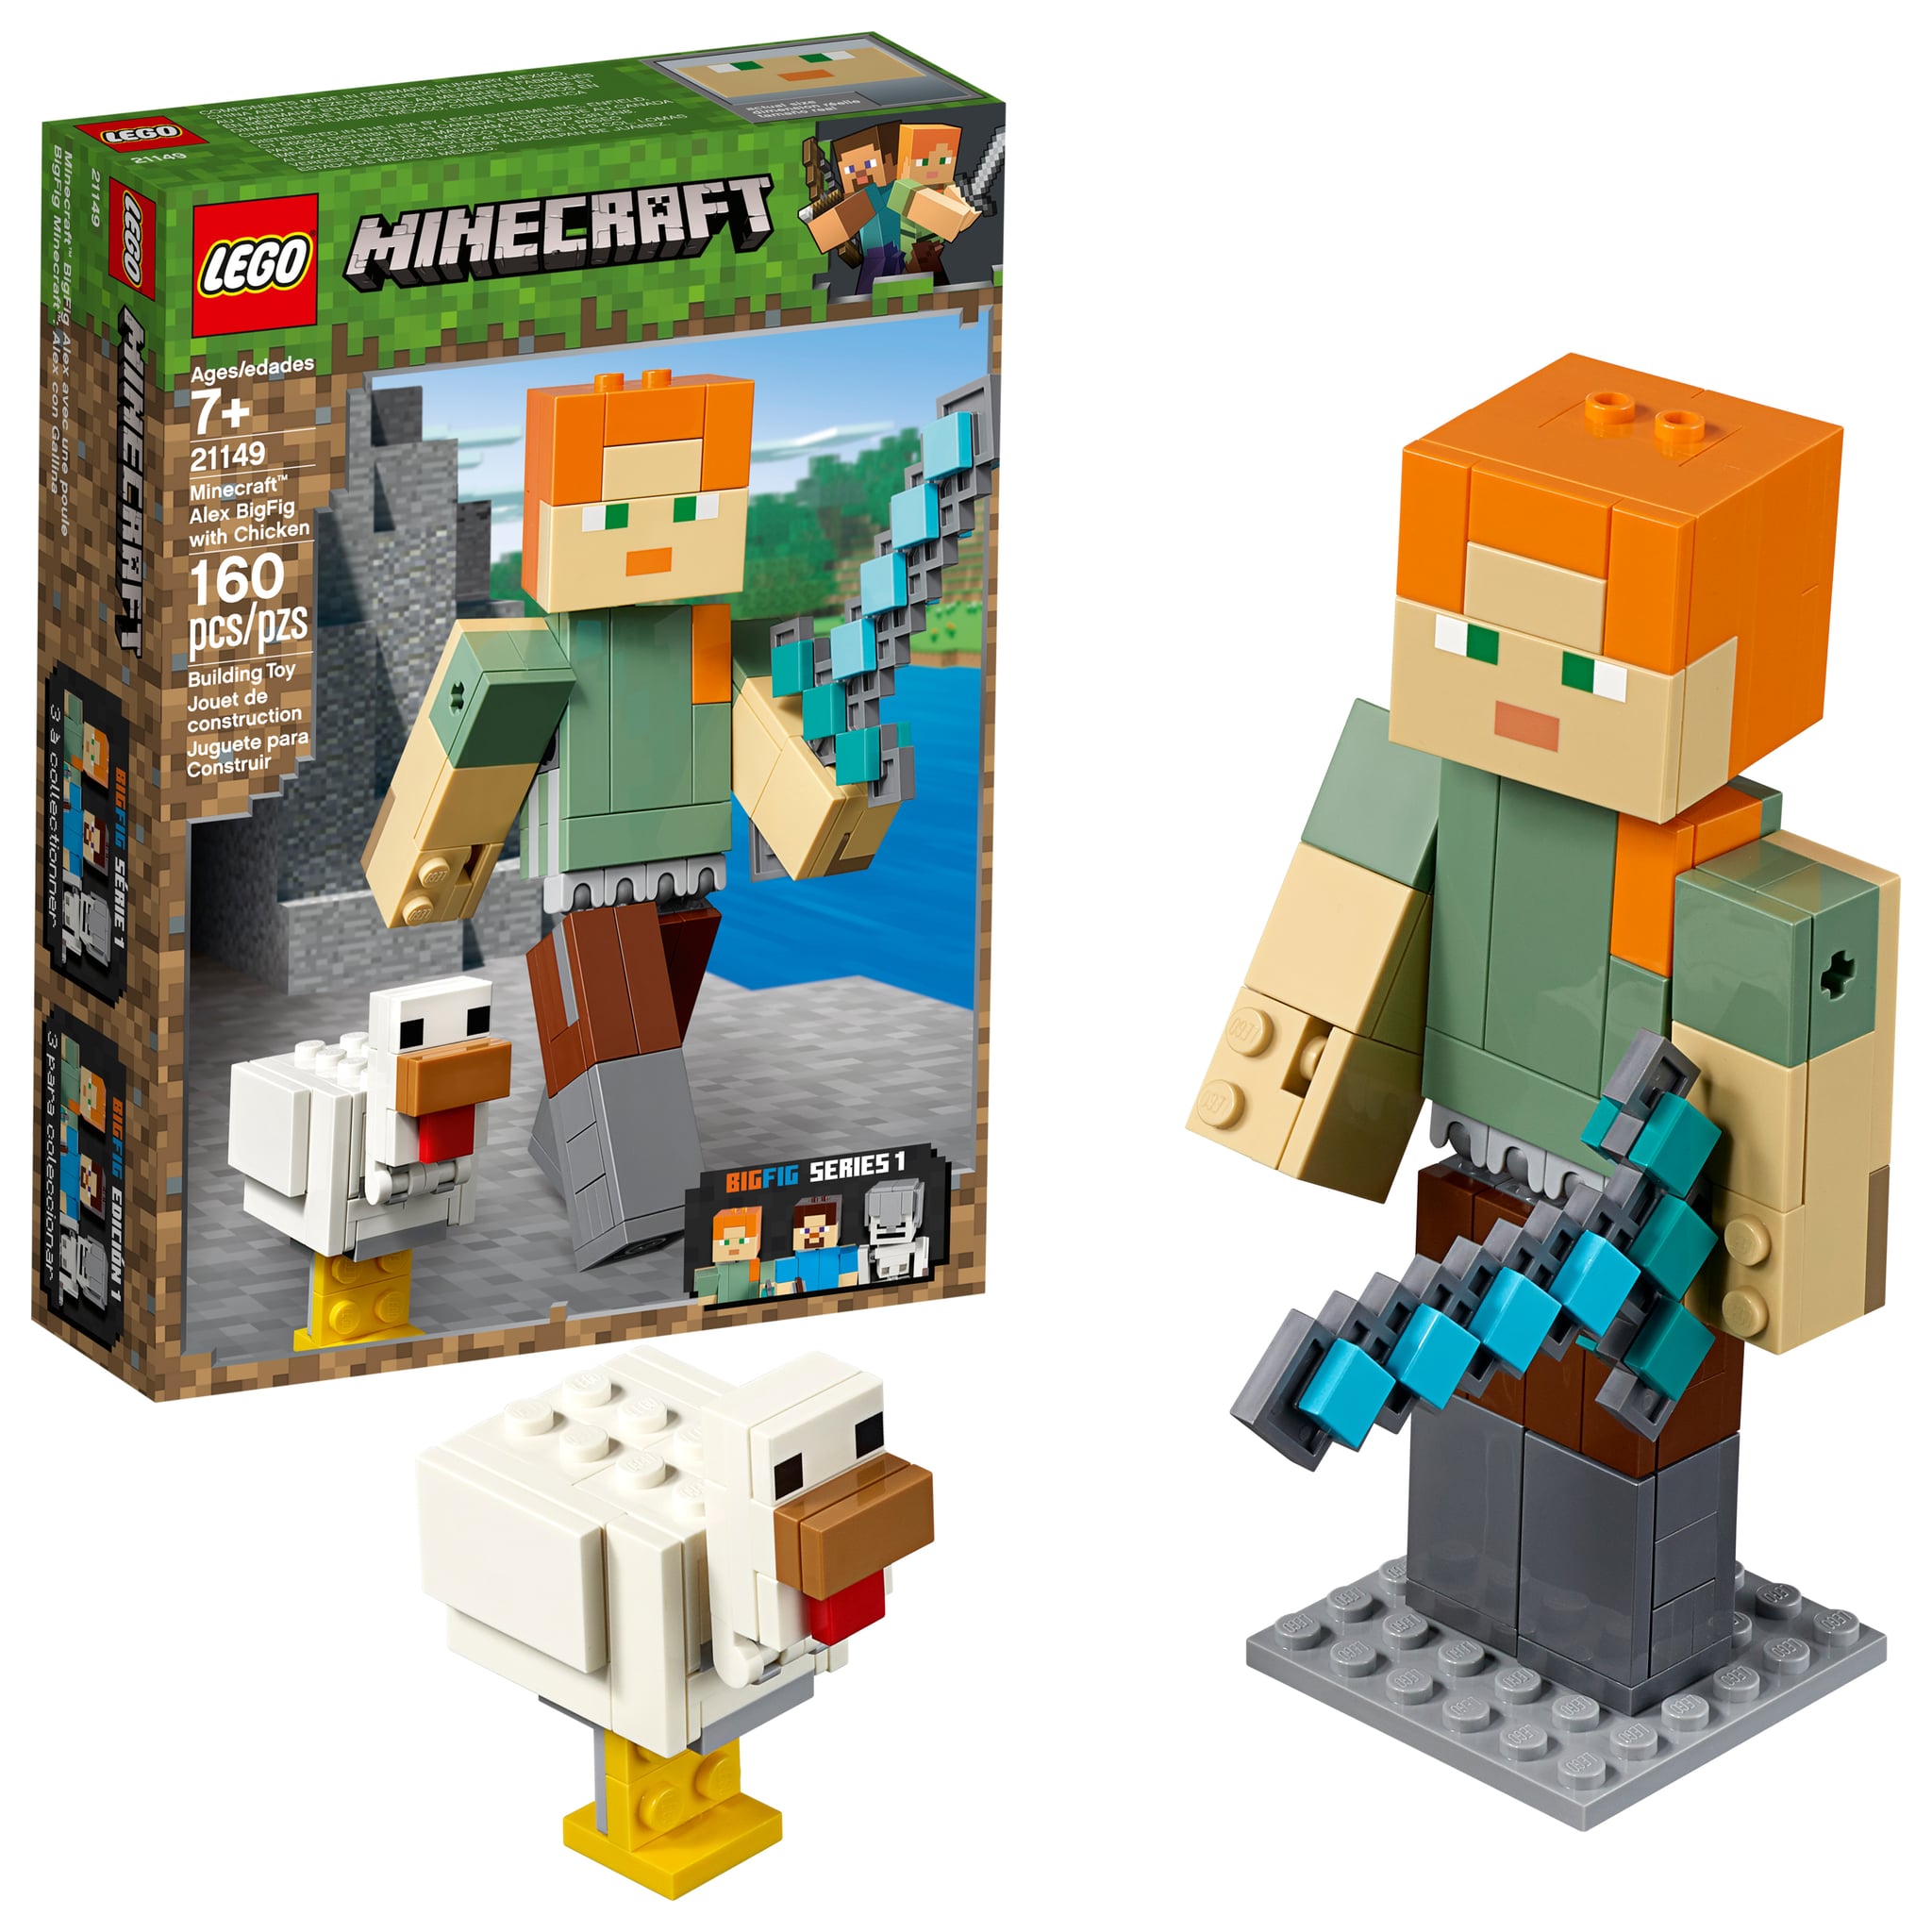 Lego Minecraft Alex Bigfig With Chicken Here Are 33 Of The Most Popular Toys Of The Season All At Walmart Popsugar Family Photo 24